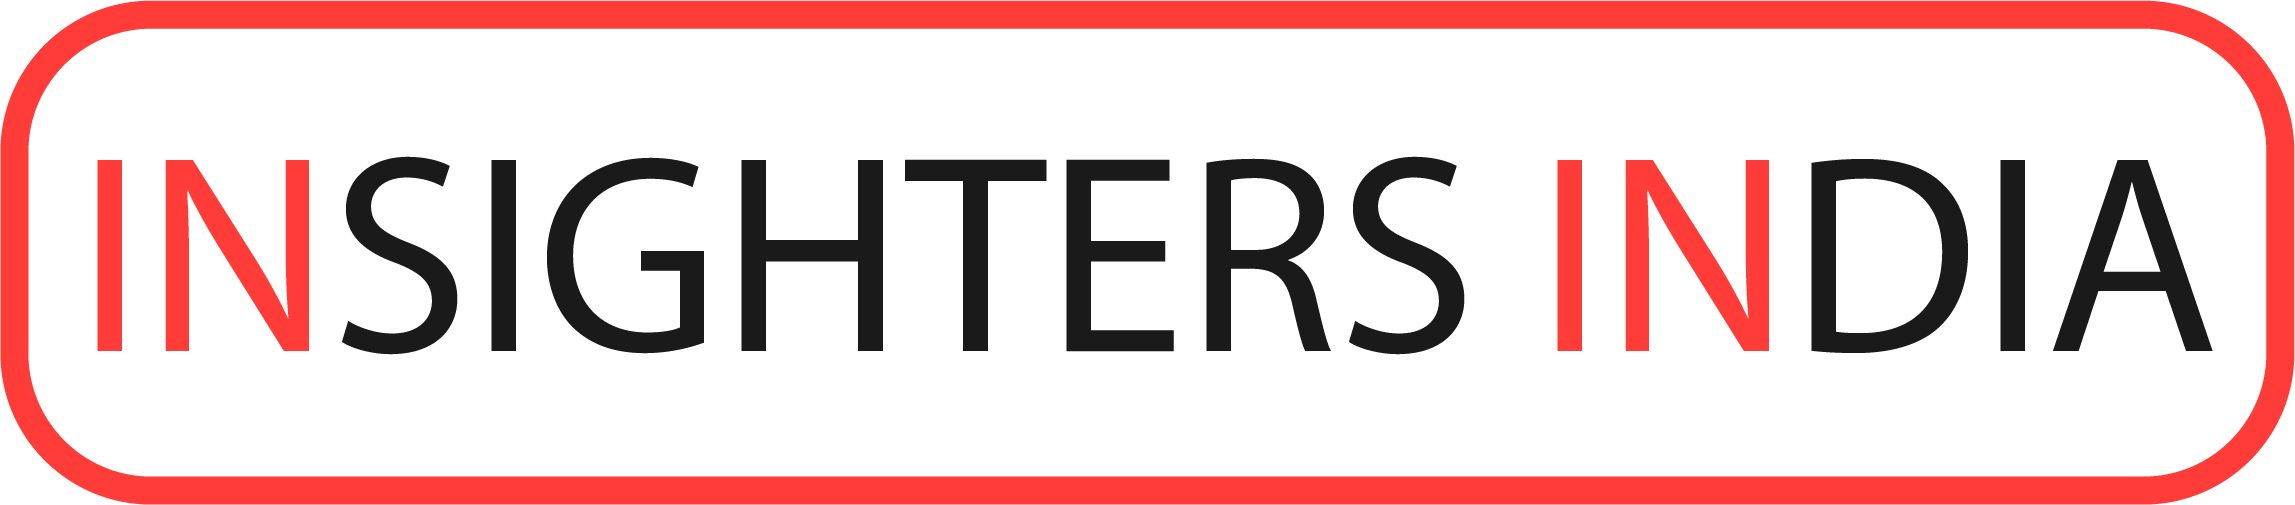 Insighters India Logo